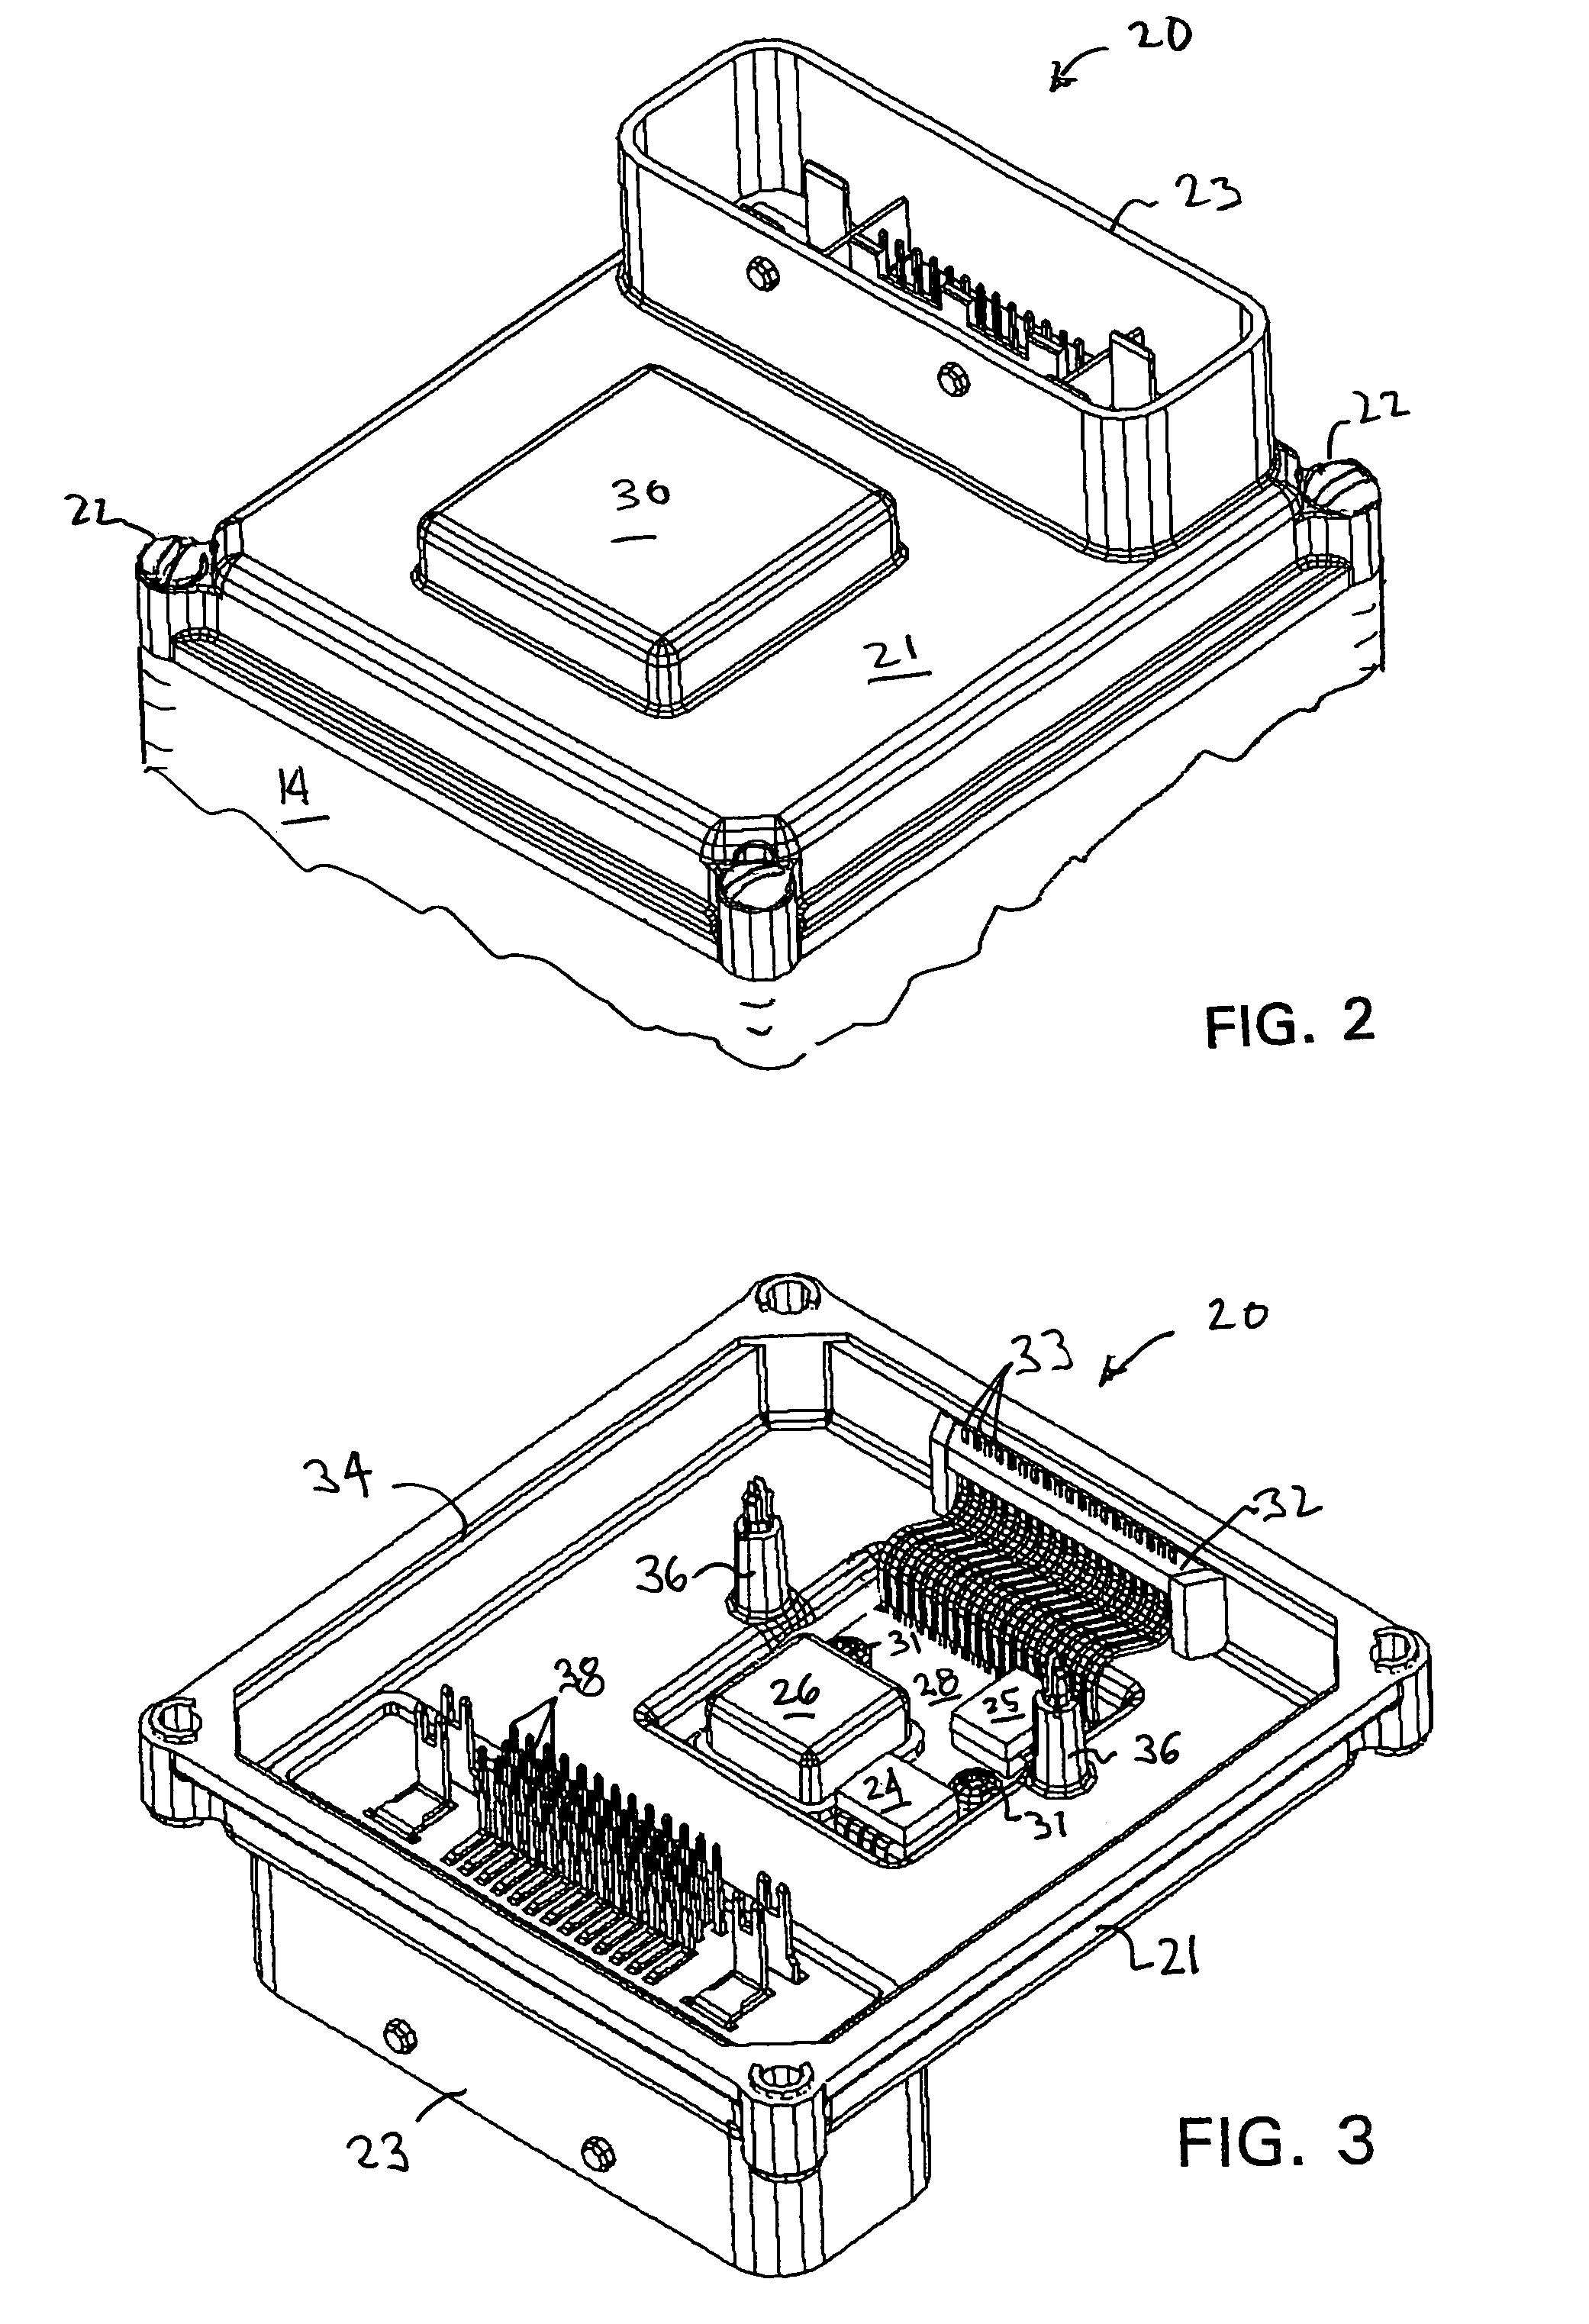 Motion sensors integrated within an electro-hydraulic control unit